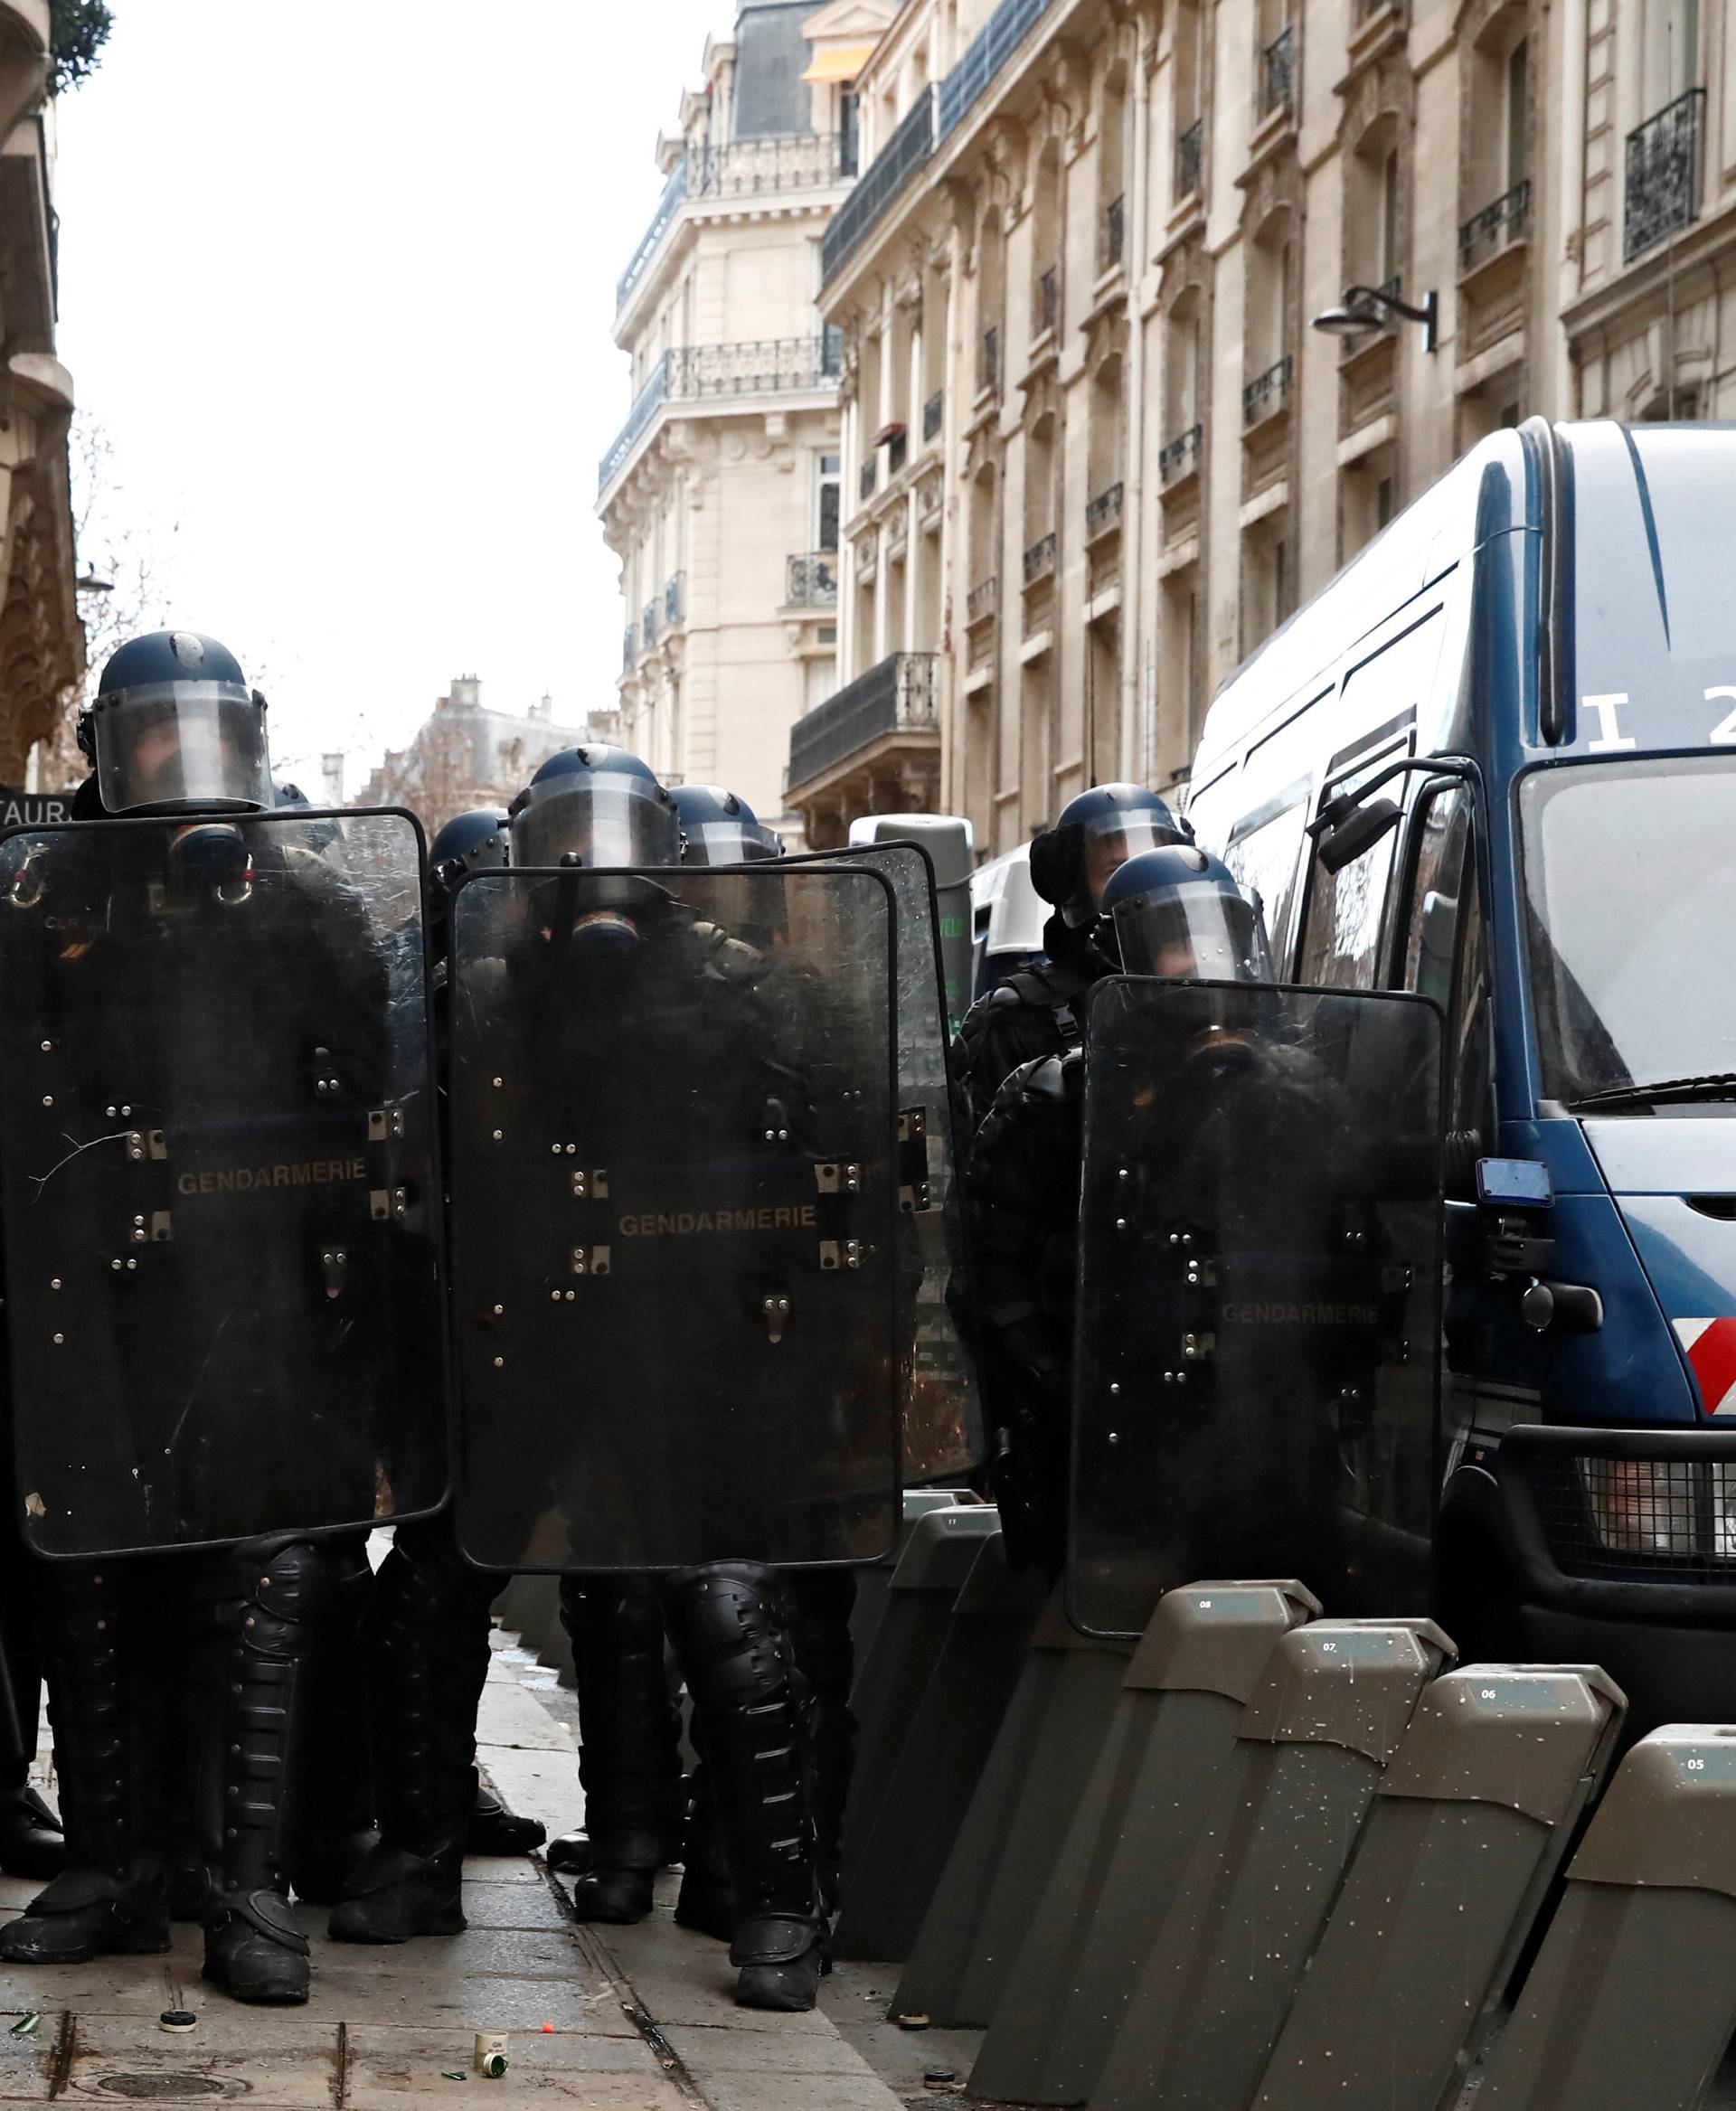 French gendarmes secure a street during a national day of protest by the "yellow vests" movement in Paris